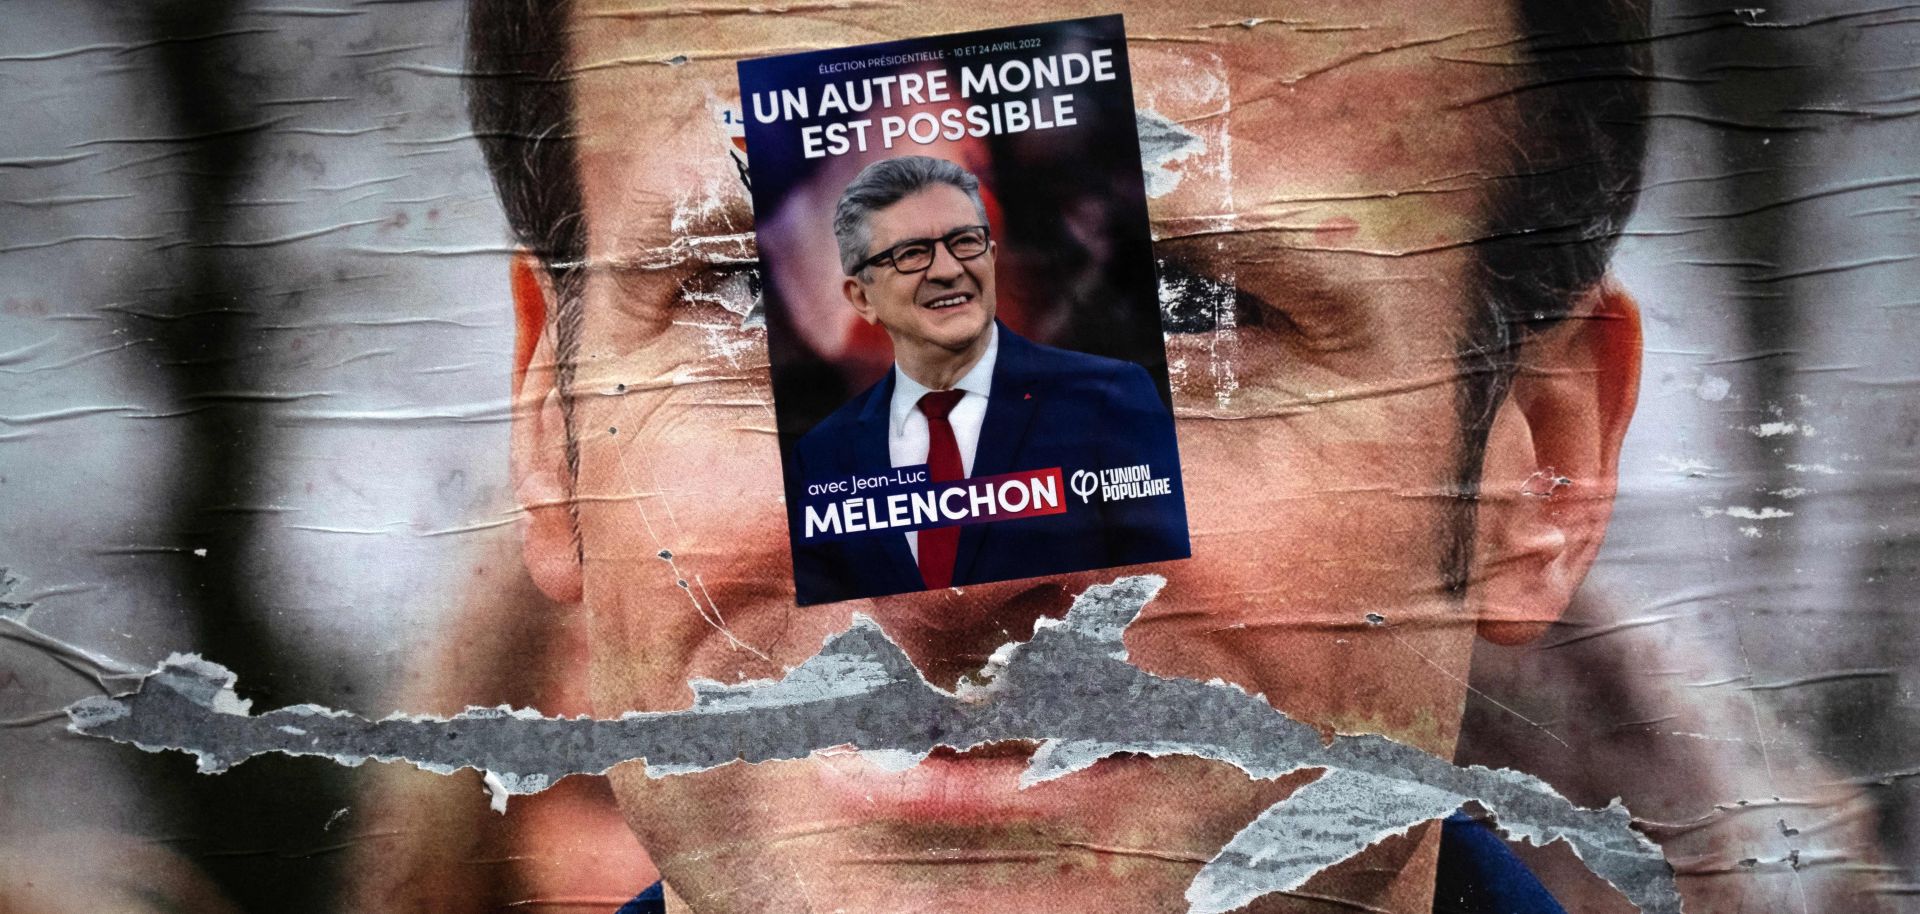 A campaign flyer reading "another world is possible" in support of far-left presidential candidate Jean-Luc Melenchon covers a vandalized poster of French President Emmanuel Macron in Paris, France, on April 19, 2022. Melechon came in third place behind Macron and right-wing candidate Marine Le Pen in the first round of France’s presidential election on April 10.